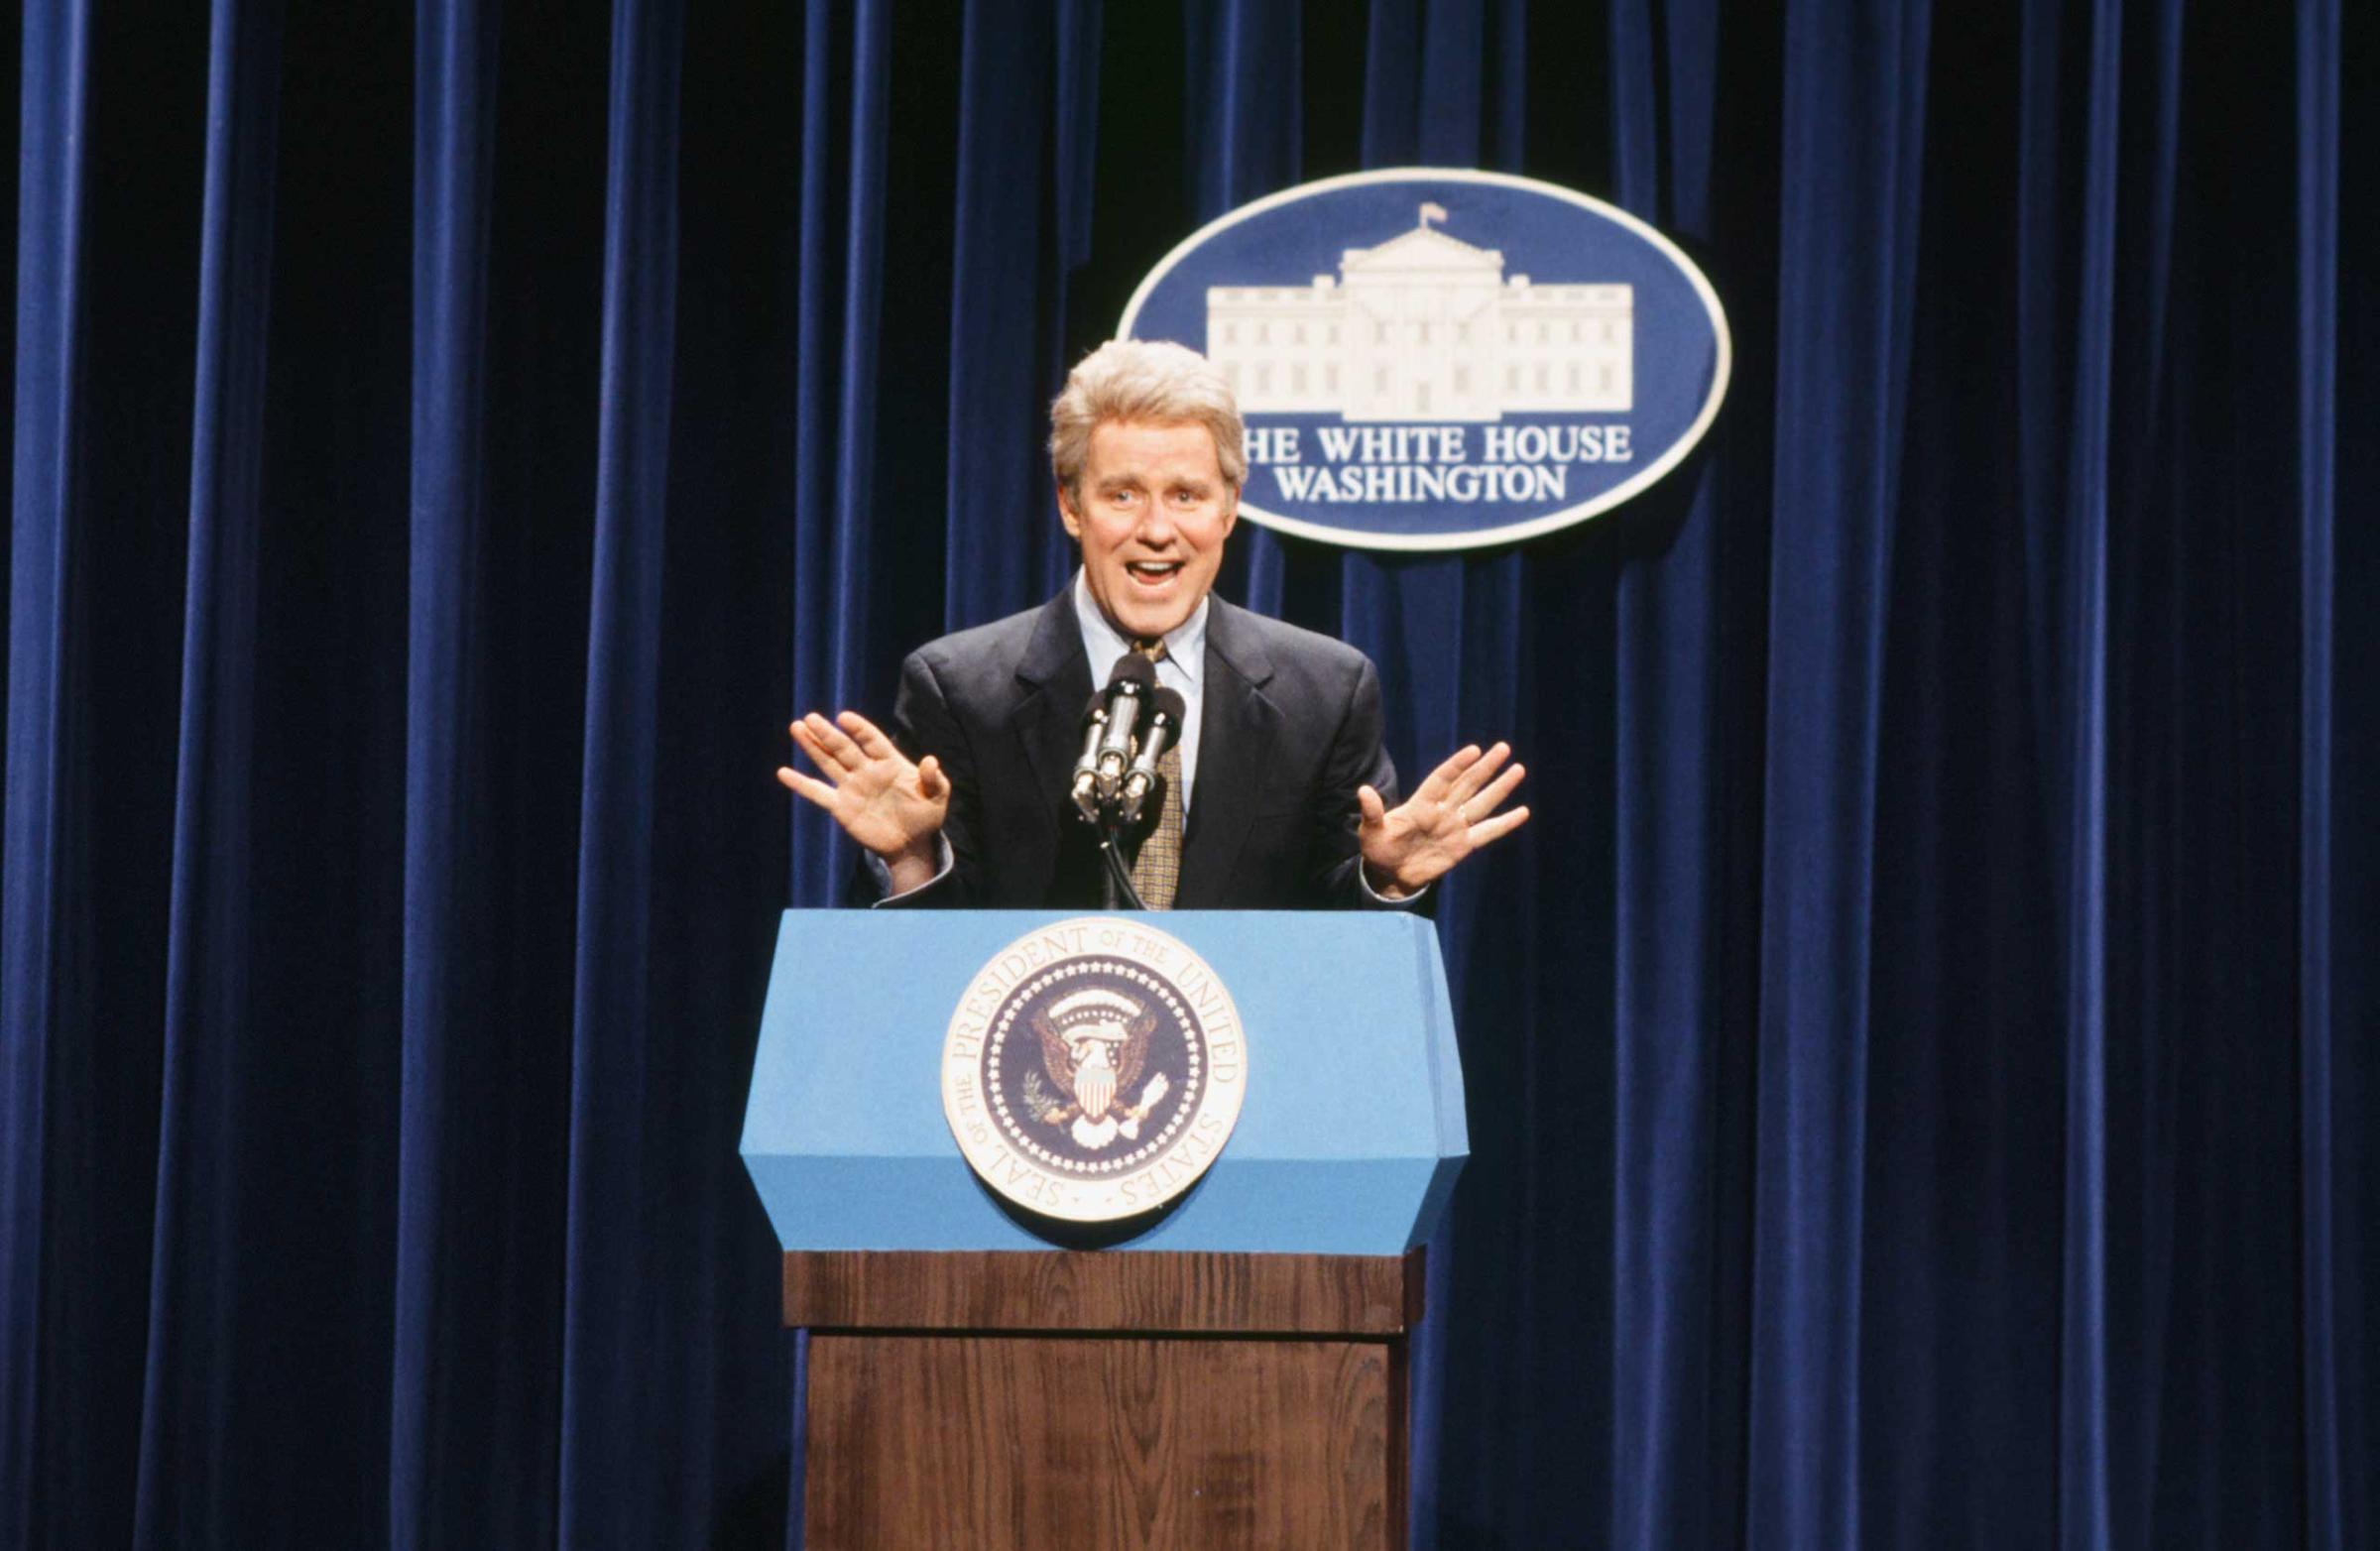 Phil Hartman as Bill Clinton during "Press Conference" skit on March 12, 1994.